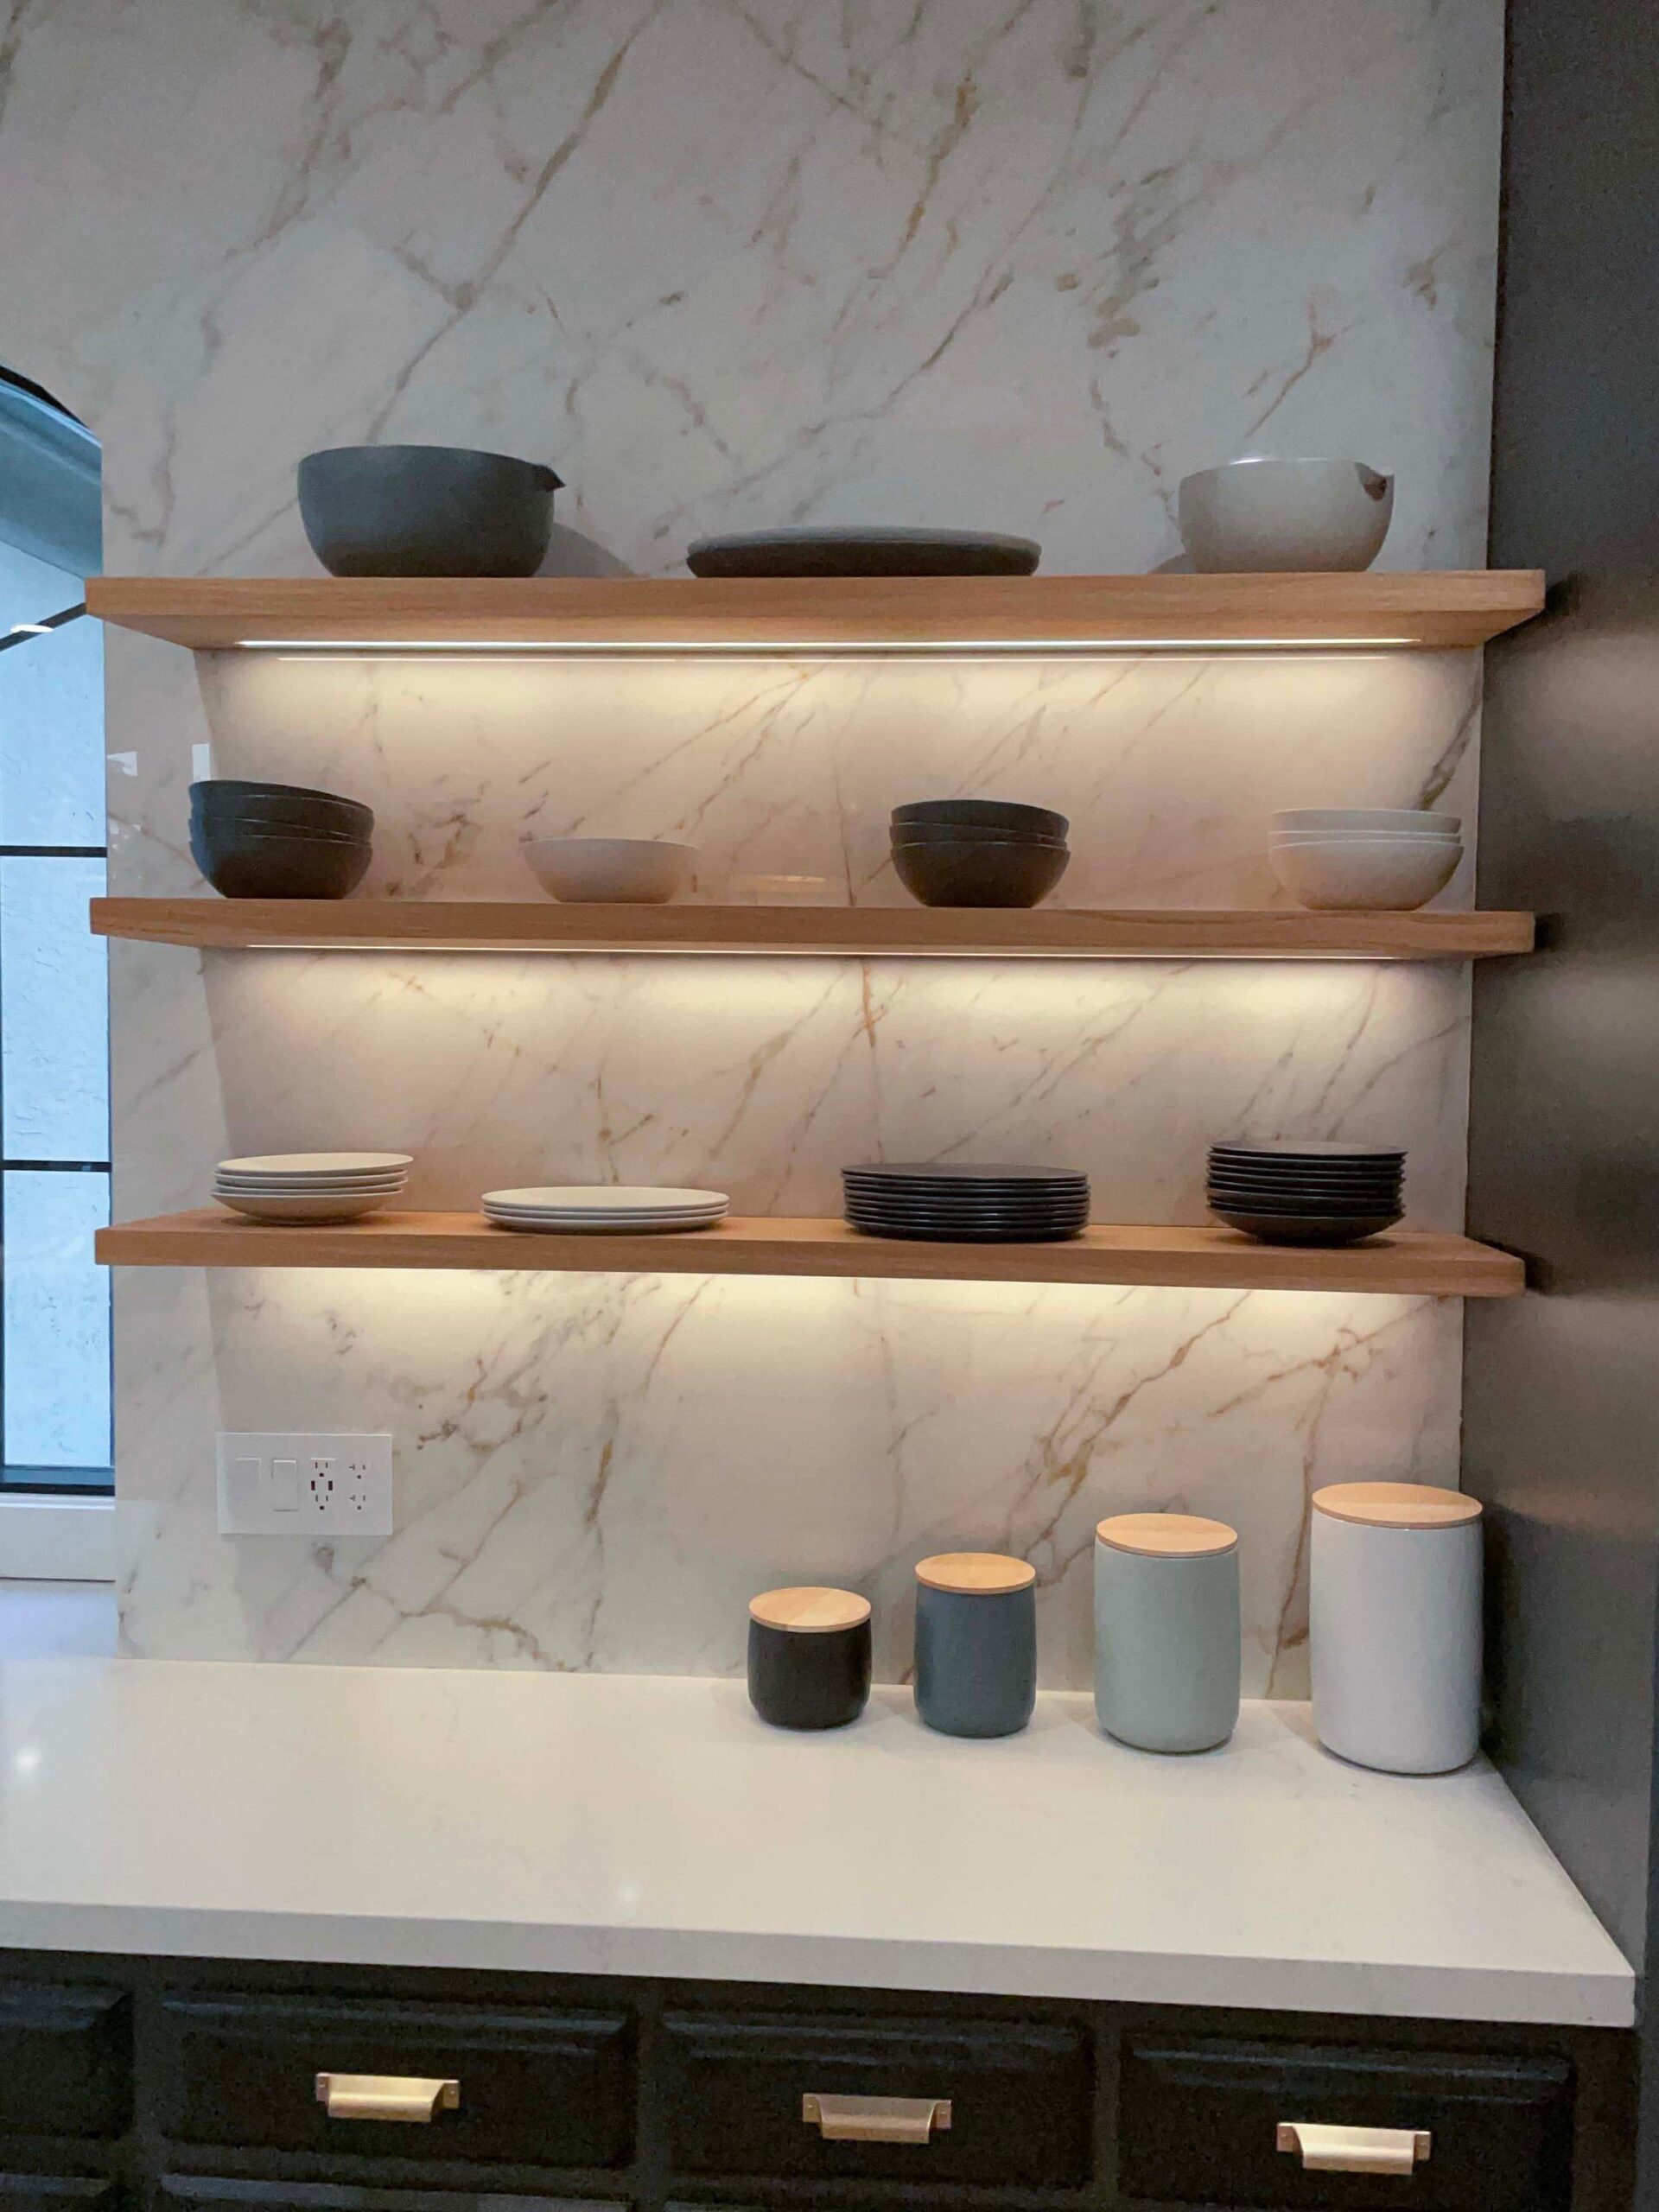 Trends in Kitchen Shelving: What’s Hot
for 2024